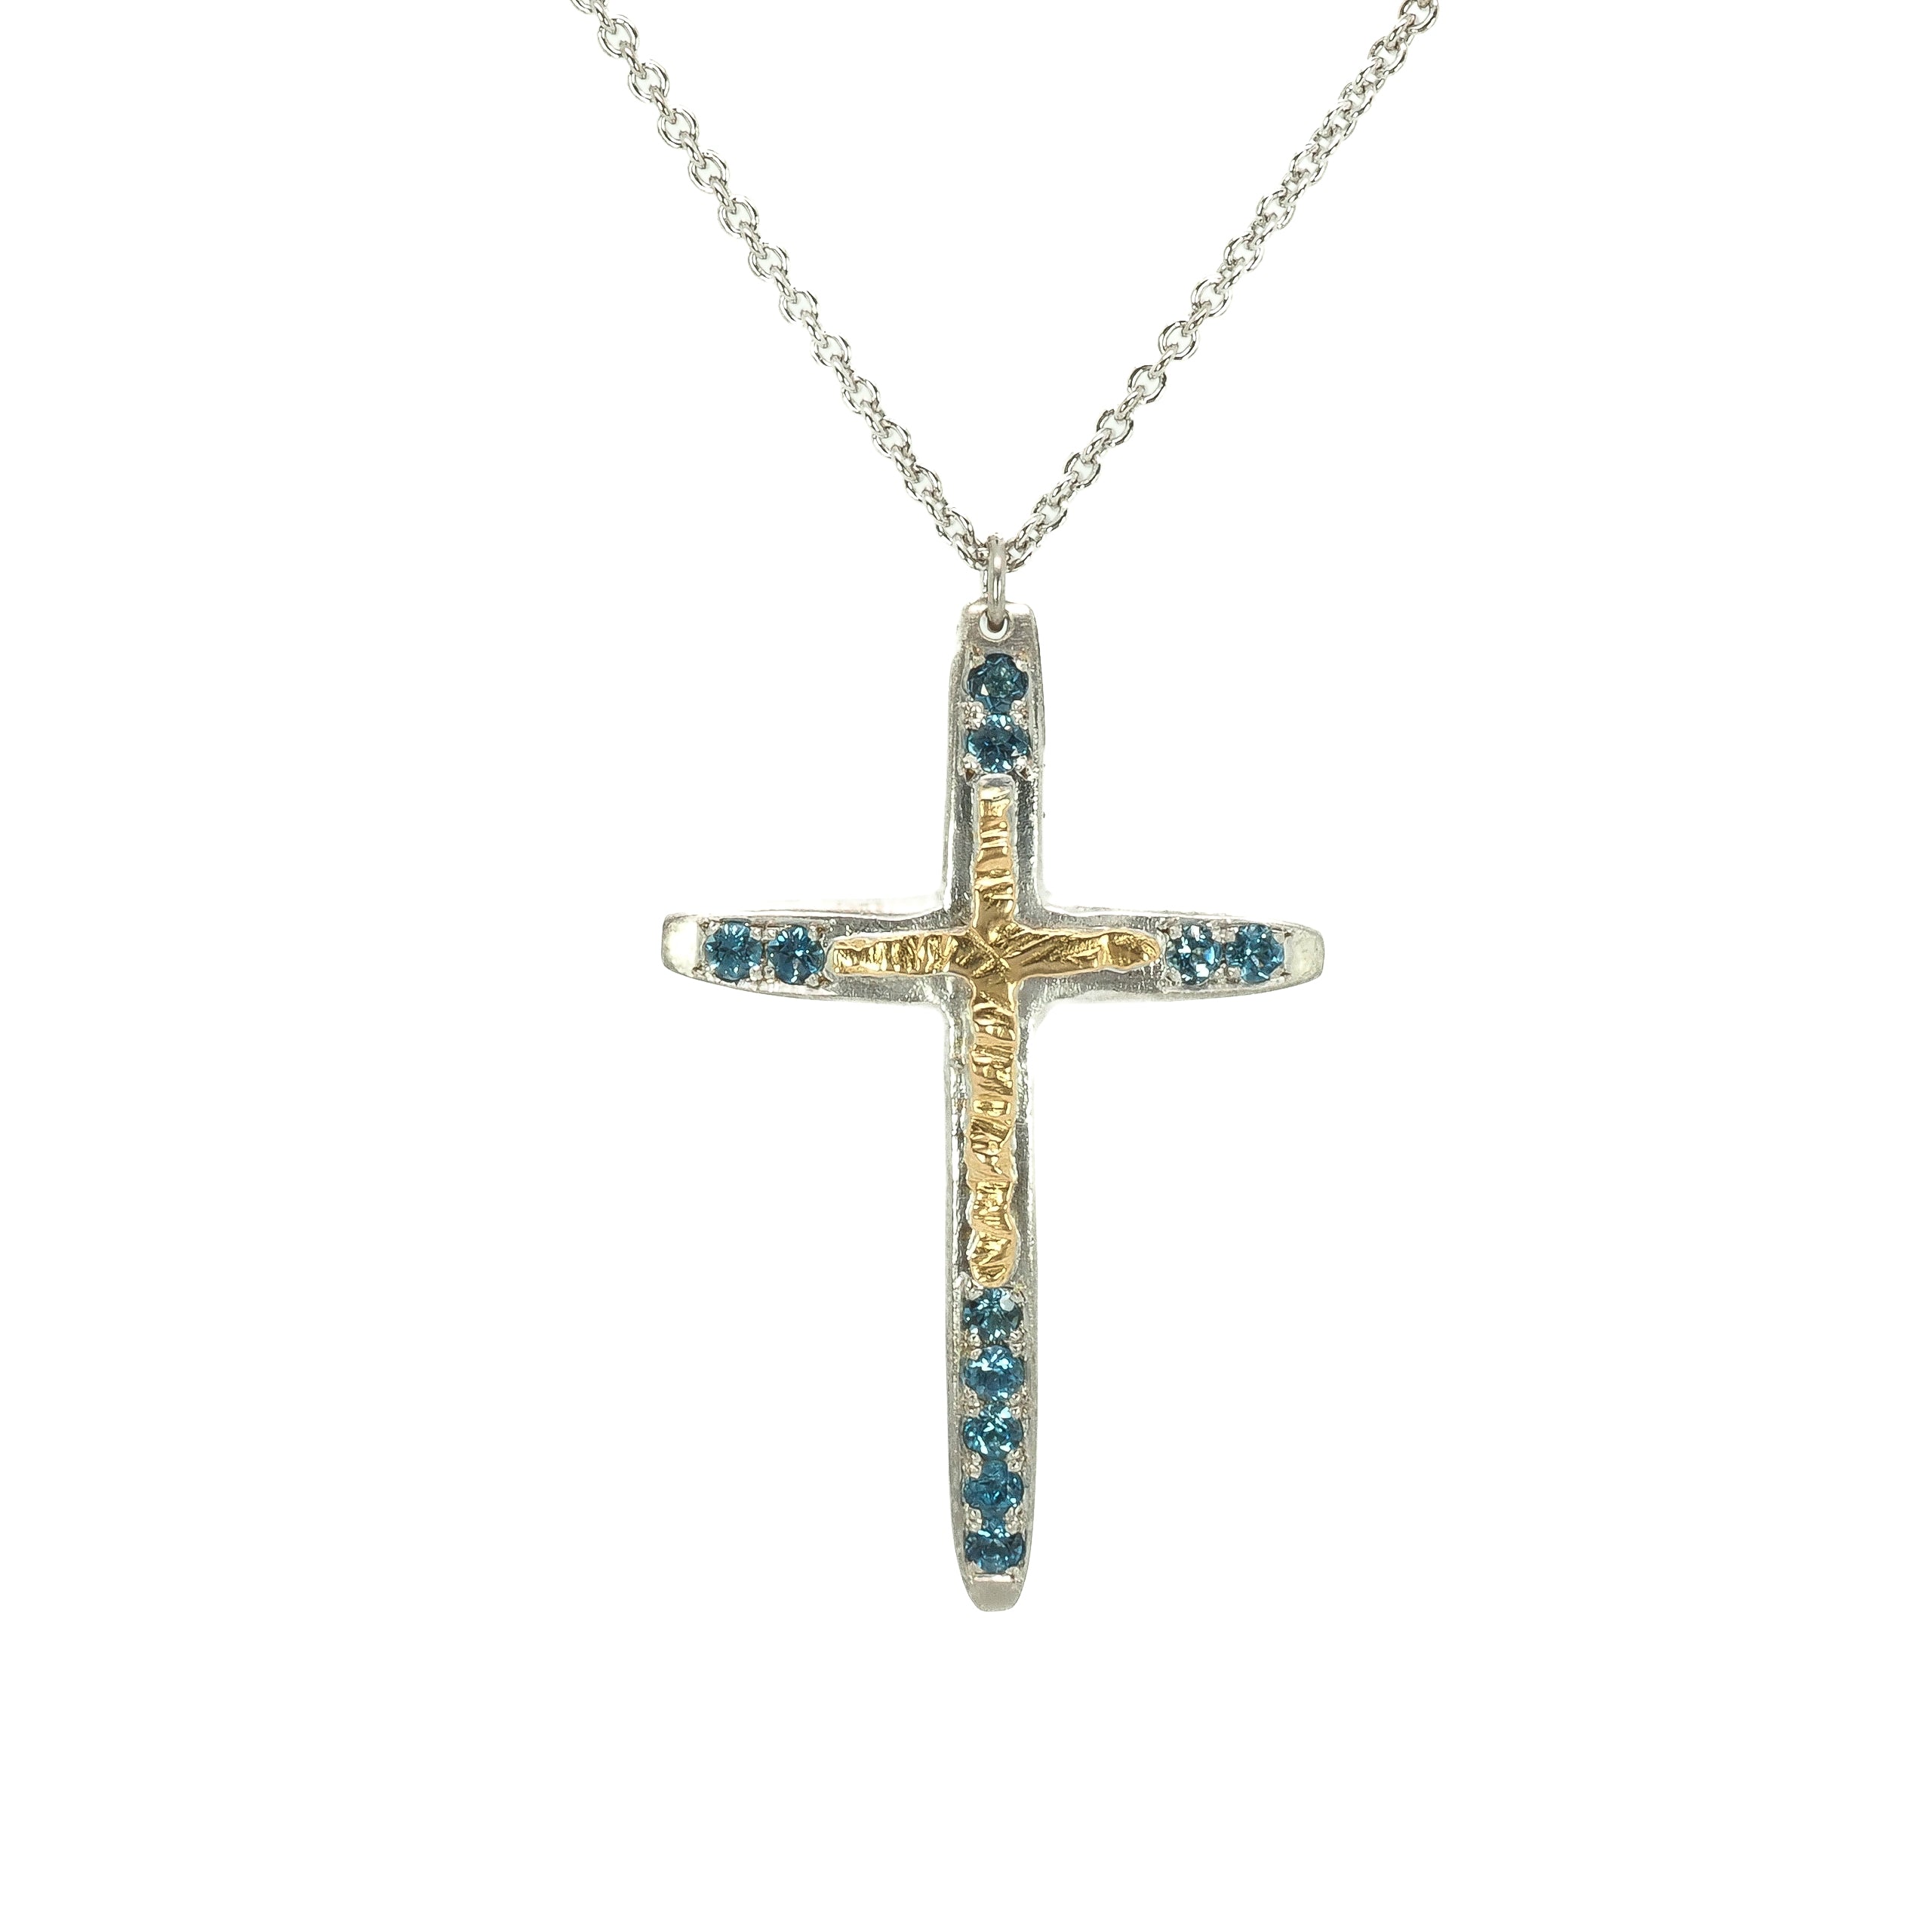 Taru Jewelry Cross Necklace made of 18K yellow gold and sterling silver is a beautiful combination of traditional symbolism and modern design. The cross, a timeless symbol of faith and devotion, is adorned with sparkling blue topaz, adding a touch of color and elegance to the piece.